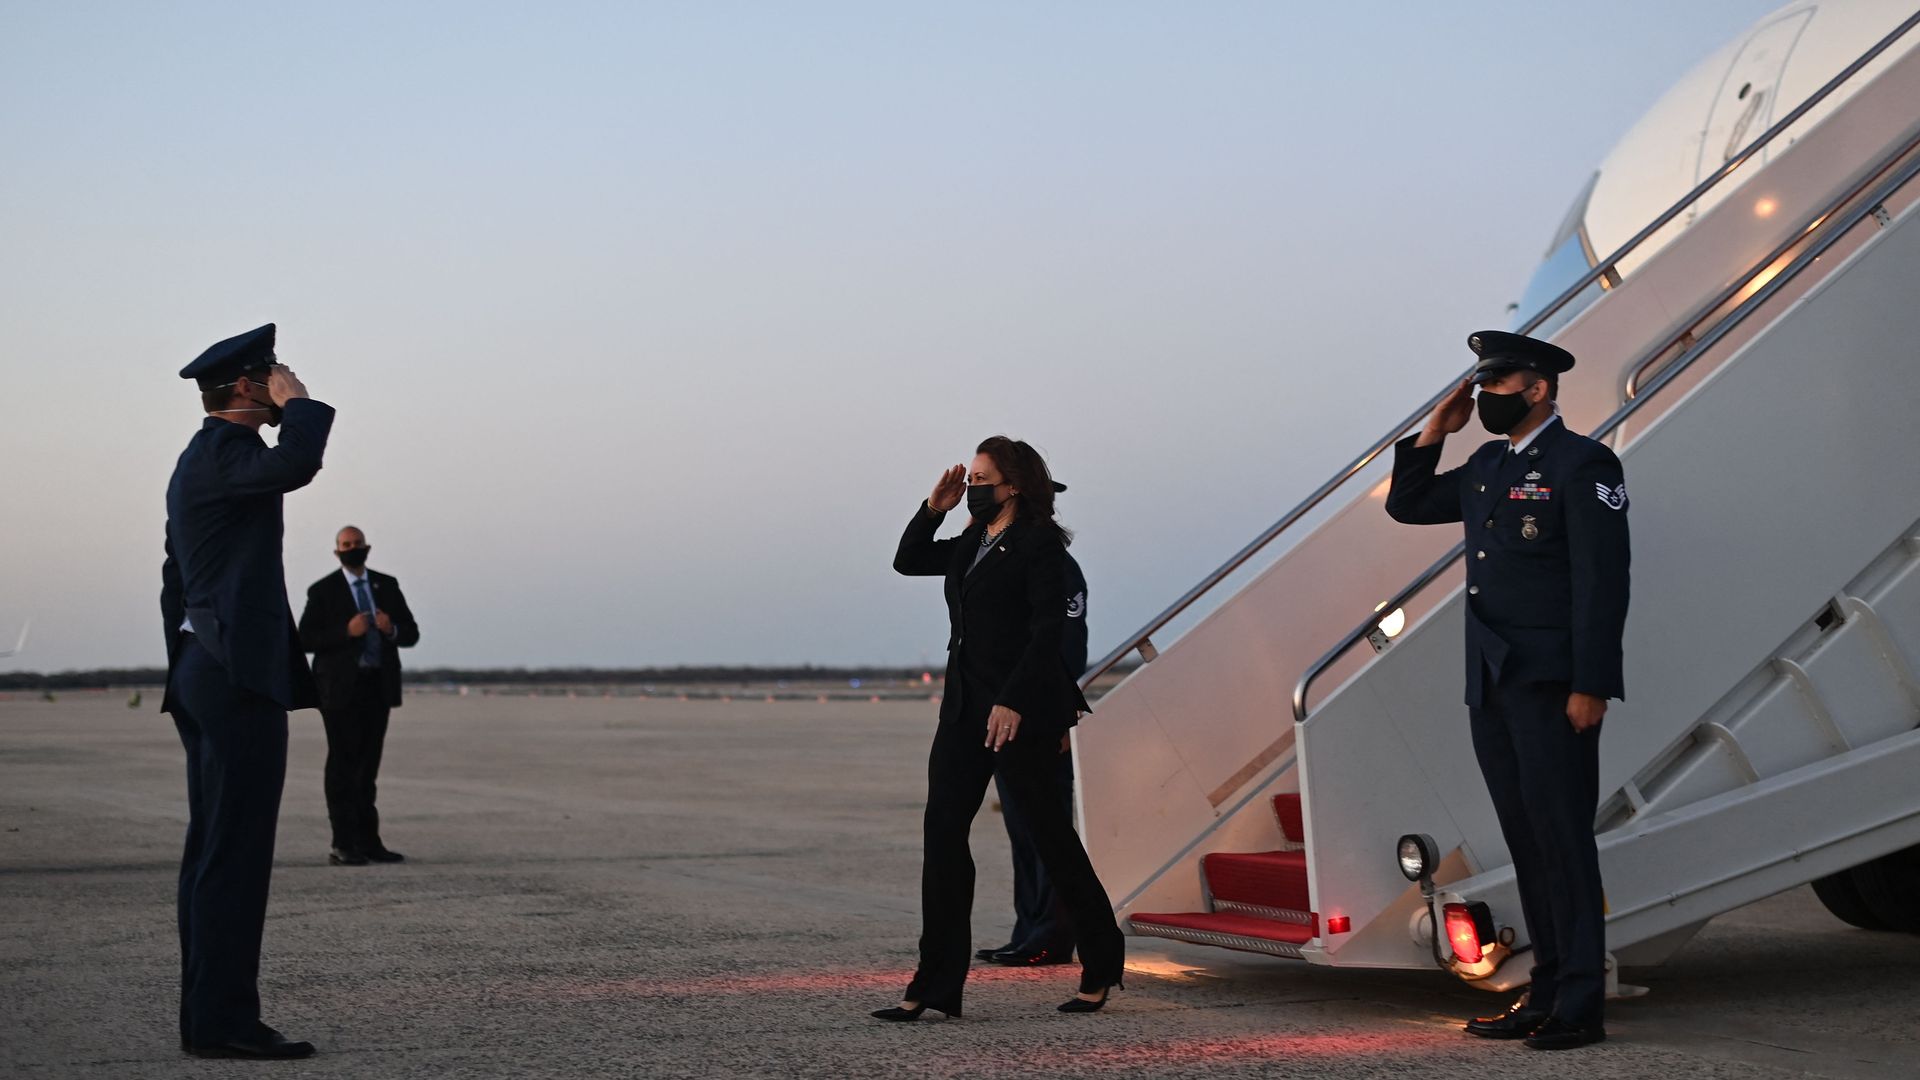 Vice President Kamala Harris is seen saluting as she steps off Air Force Two.